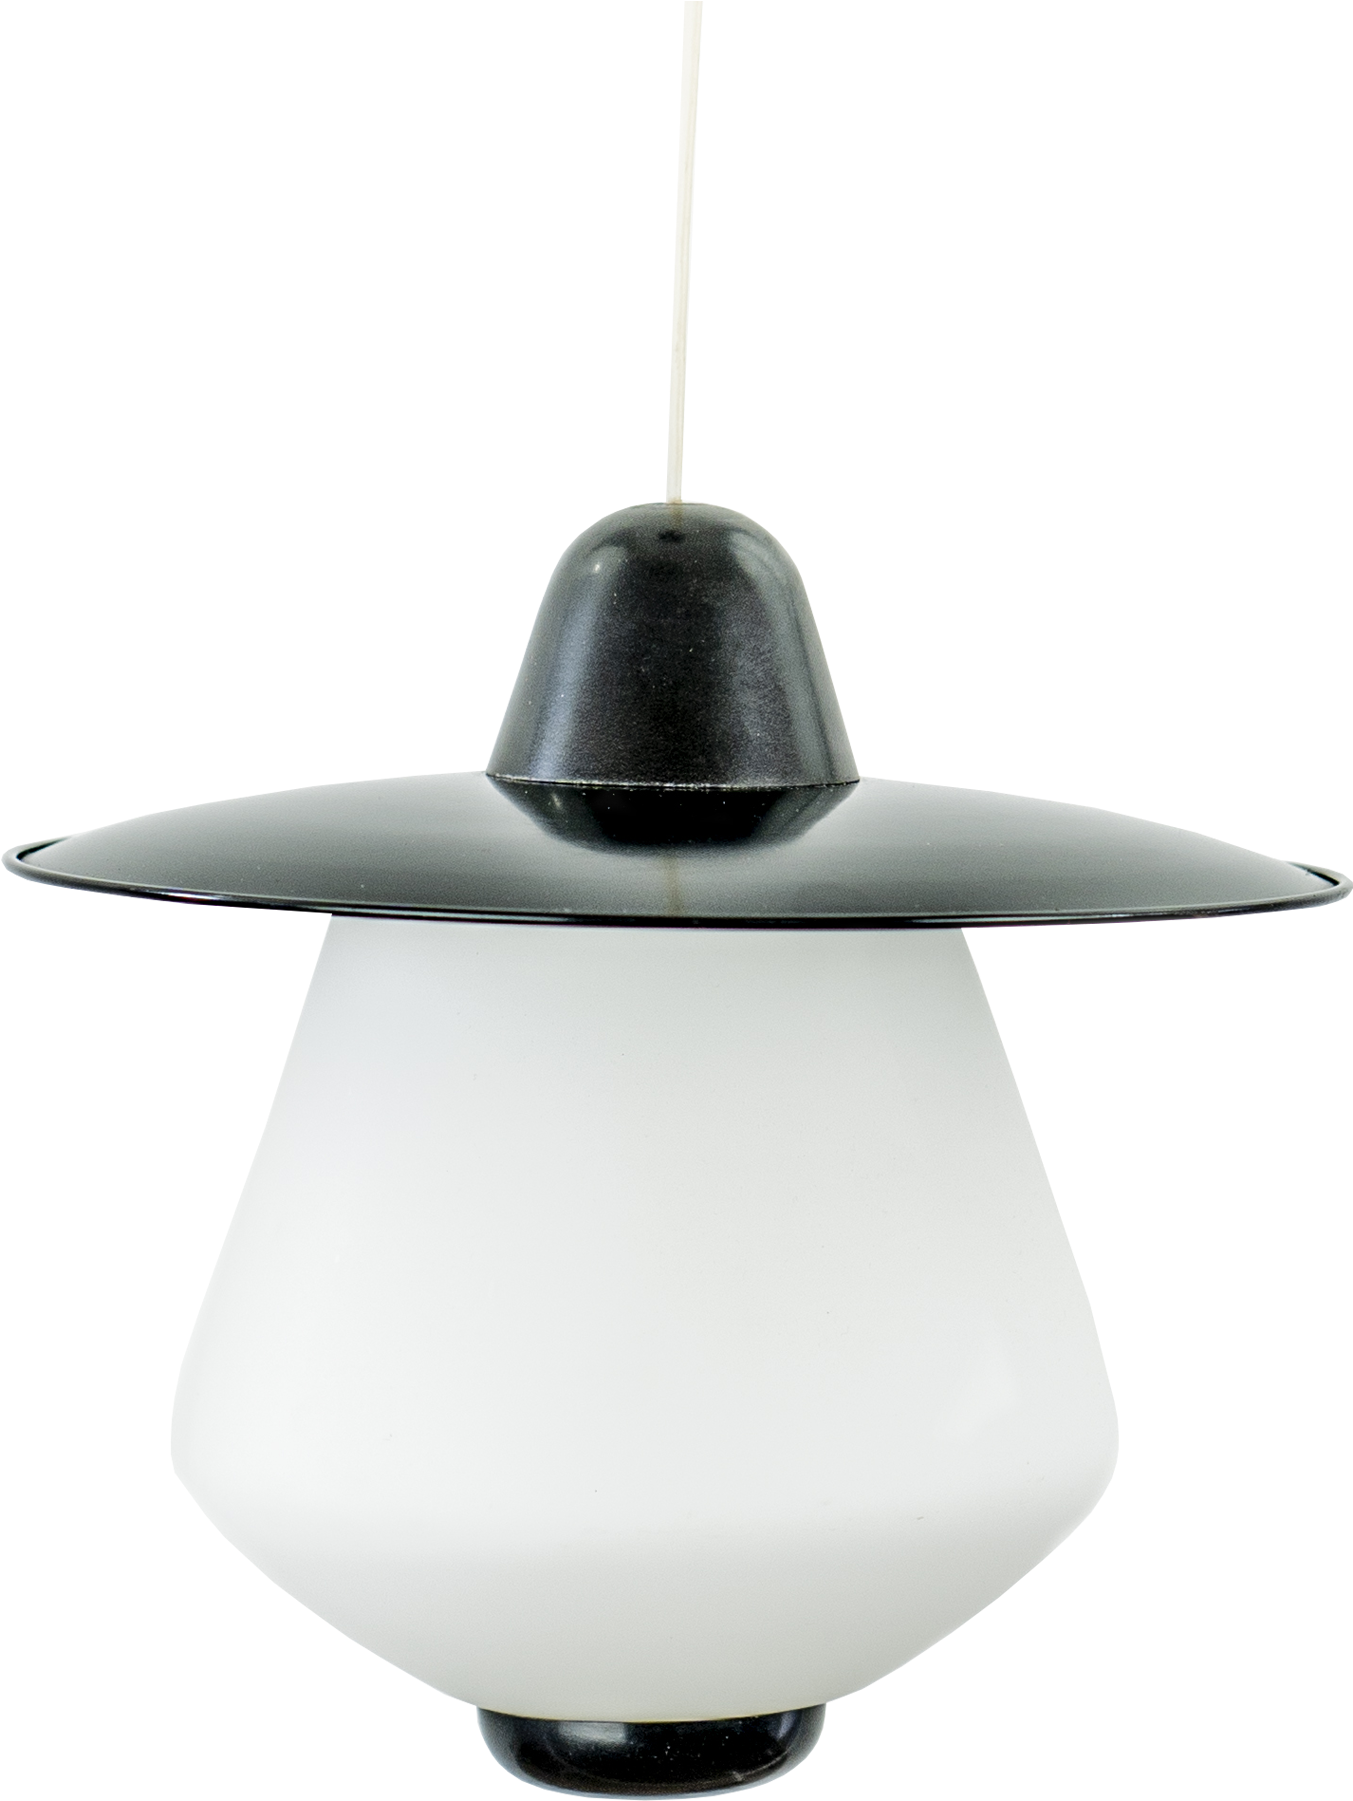 A White And Black Light Fixture